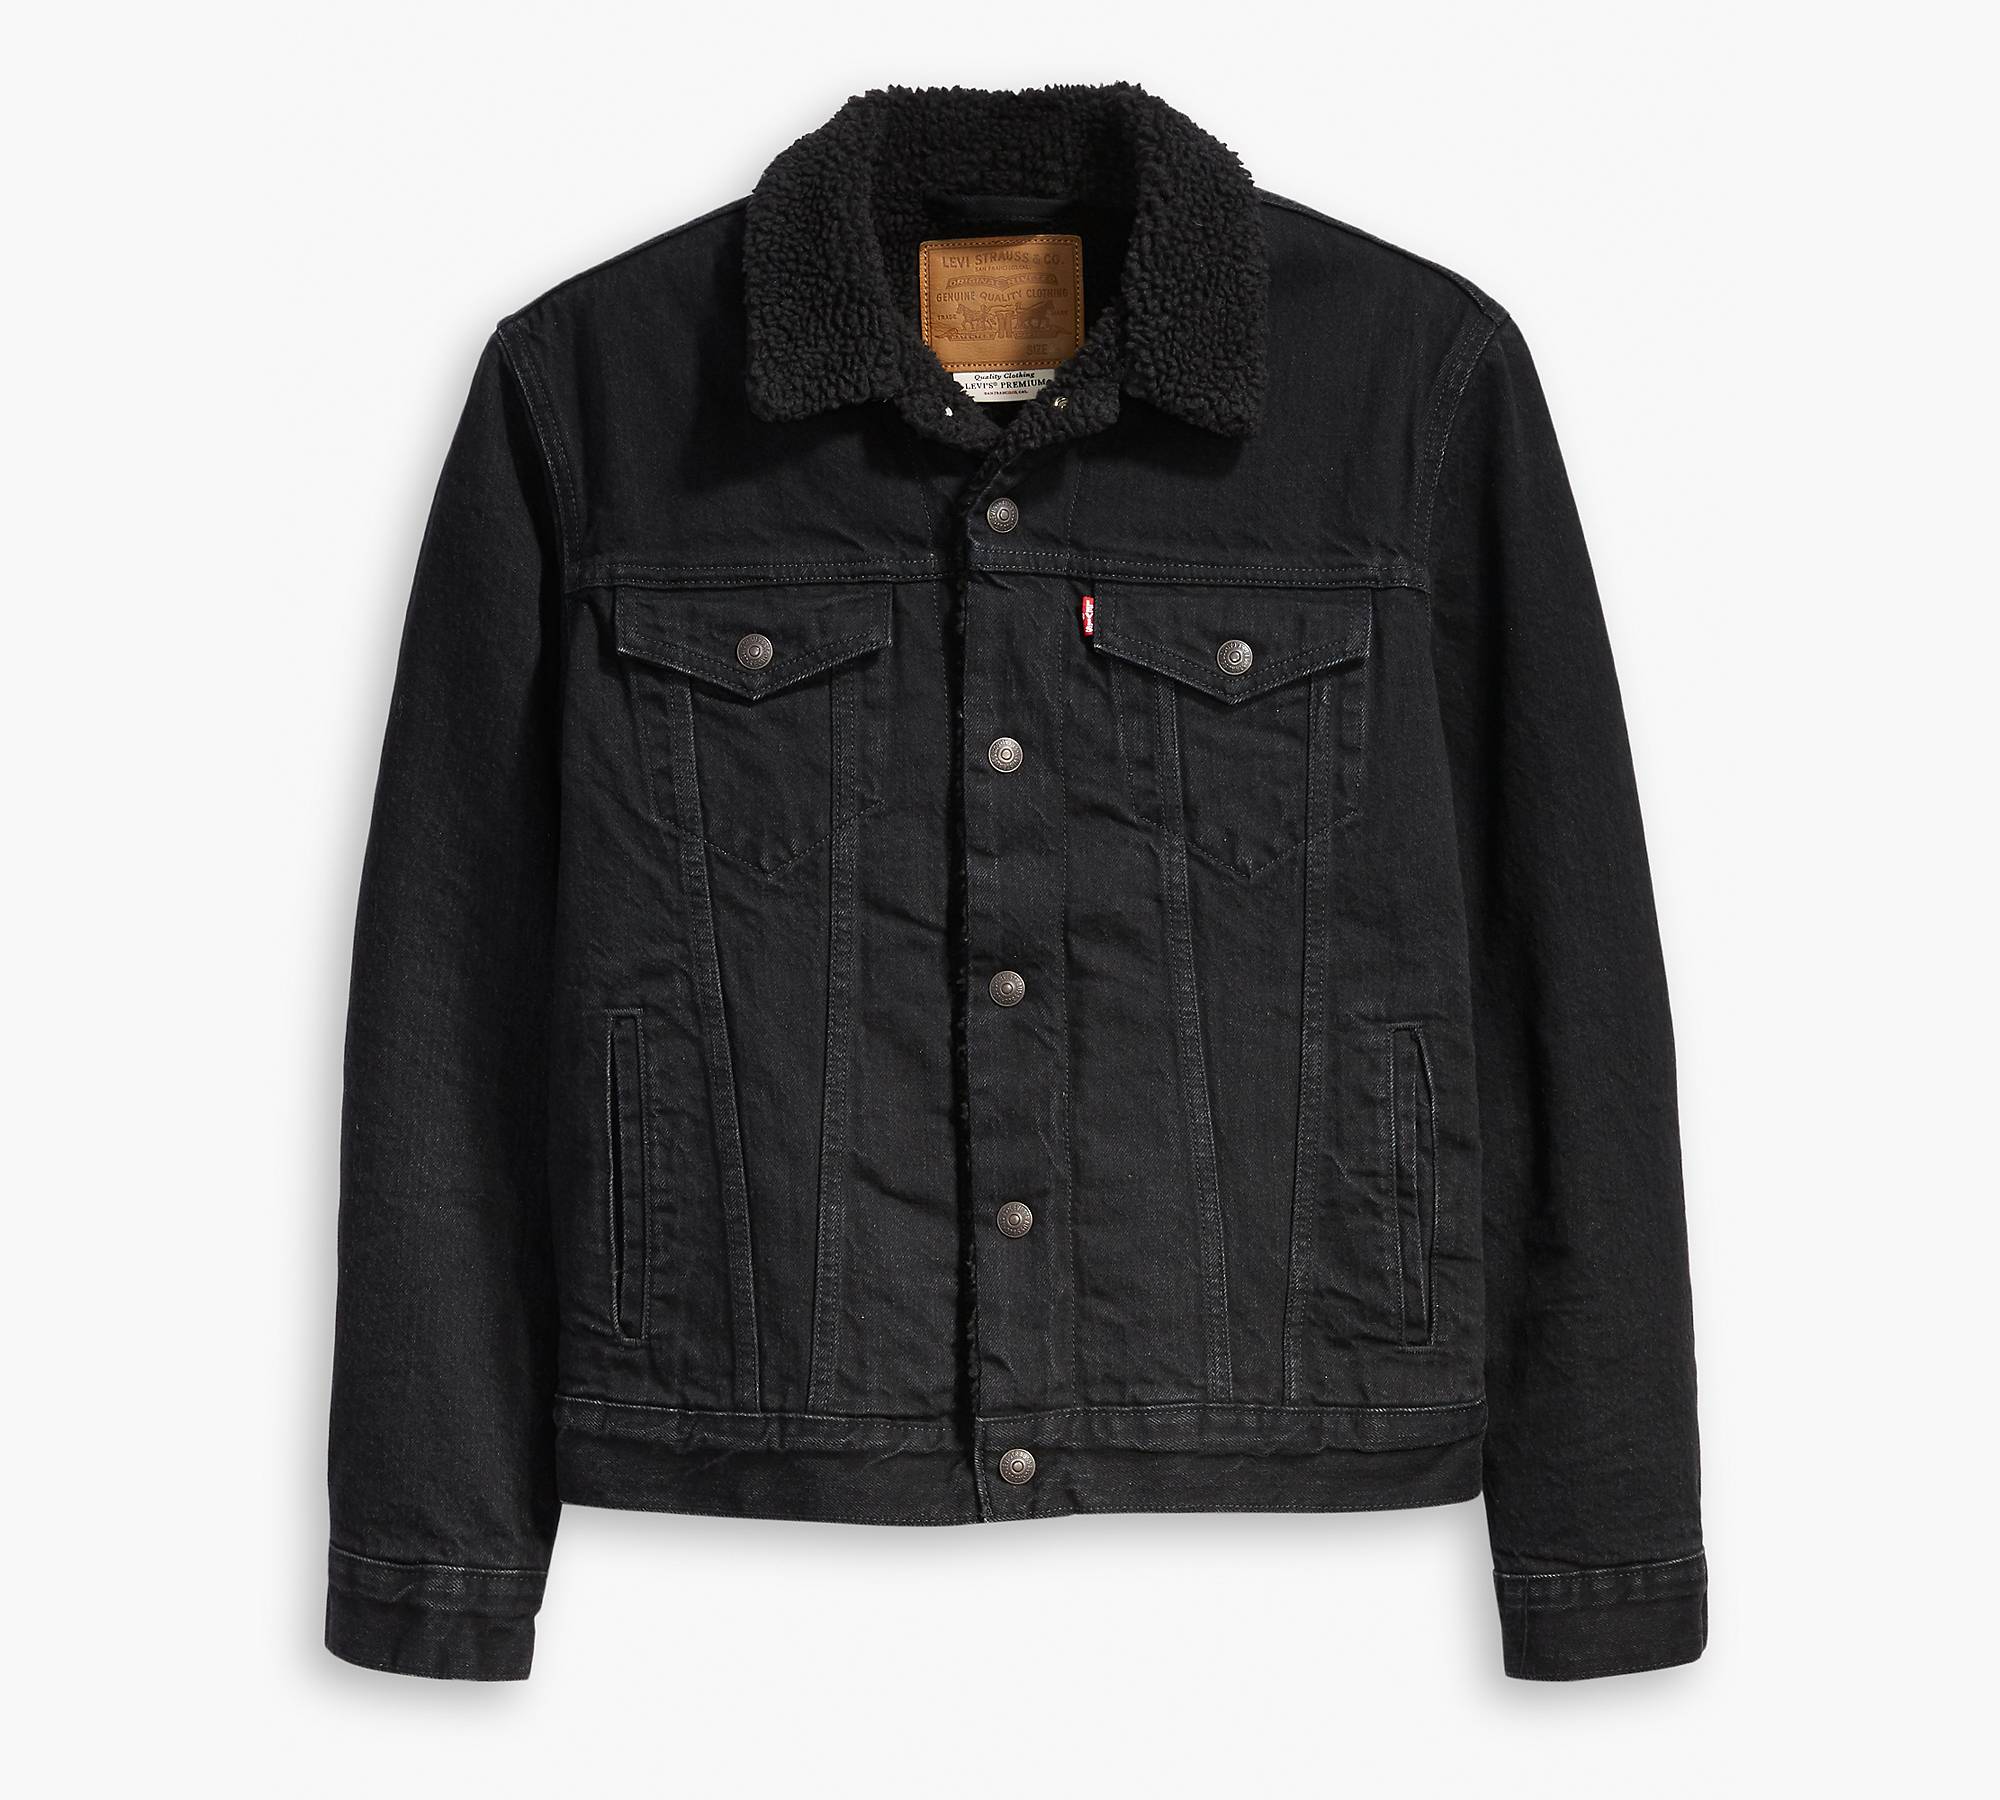 Messed up Celsius Hardness Type Iii Sherpa Trucker Jacket - Black | Levi's® US